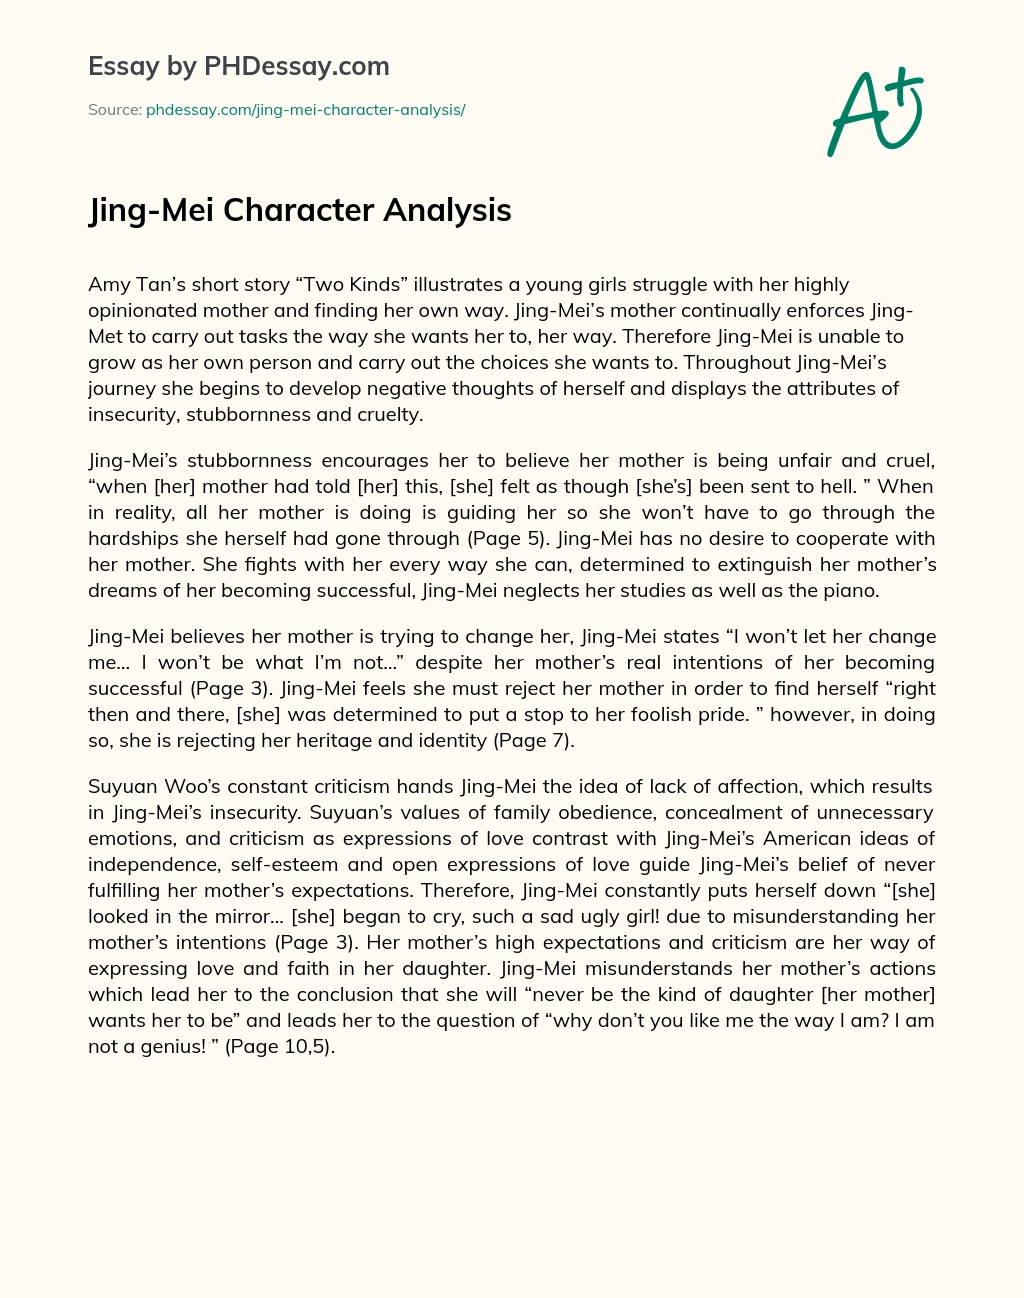 Jing-Mei Character Analysis essay